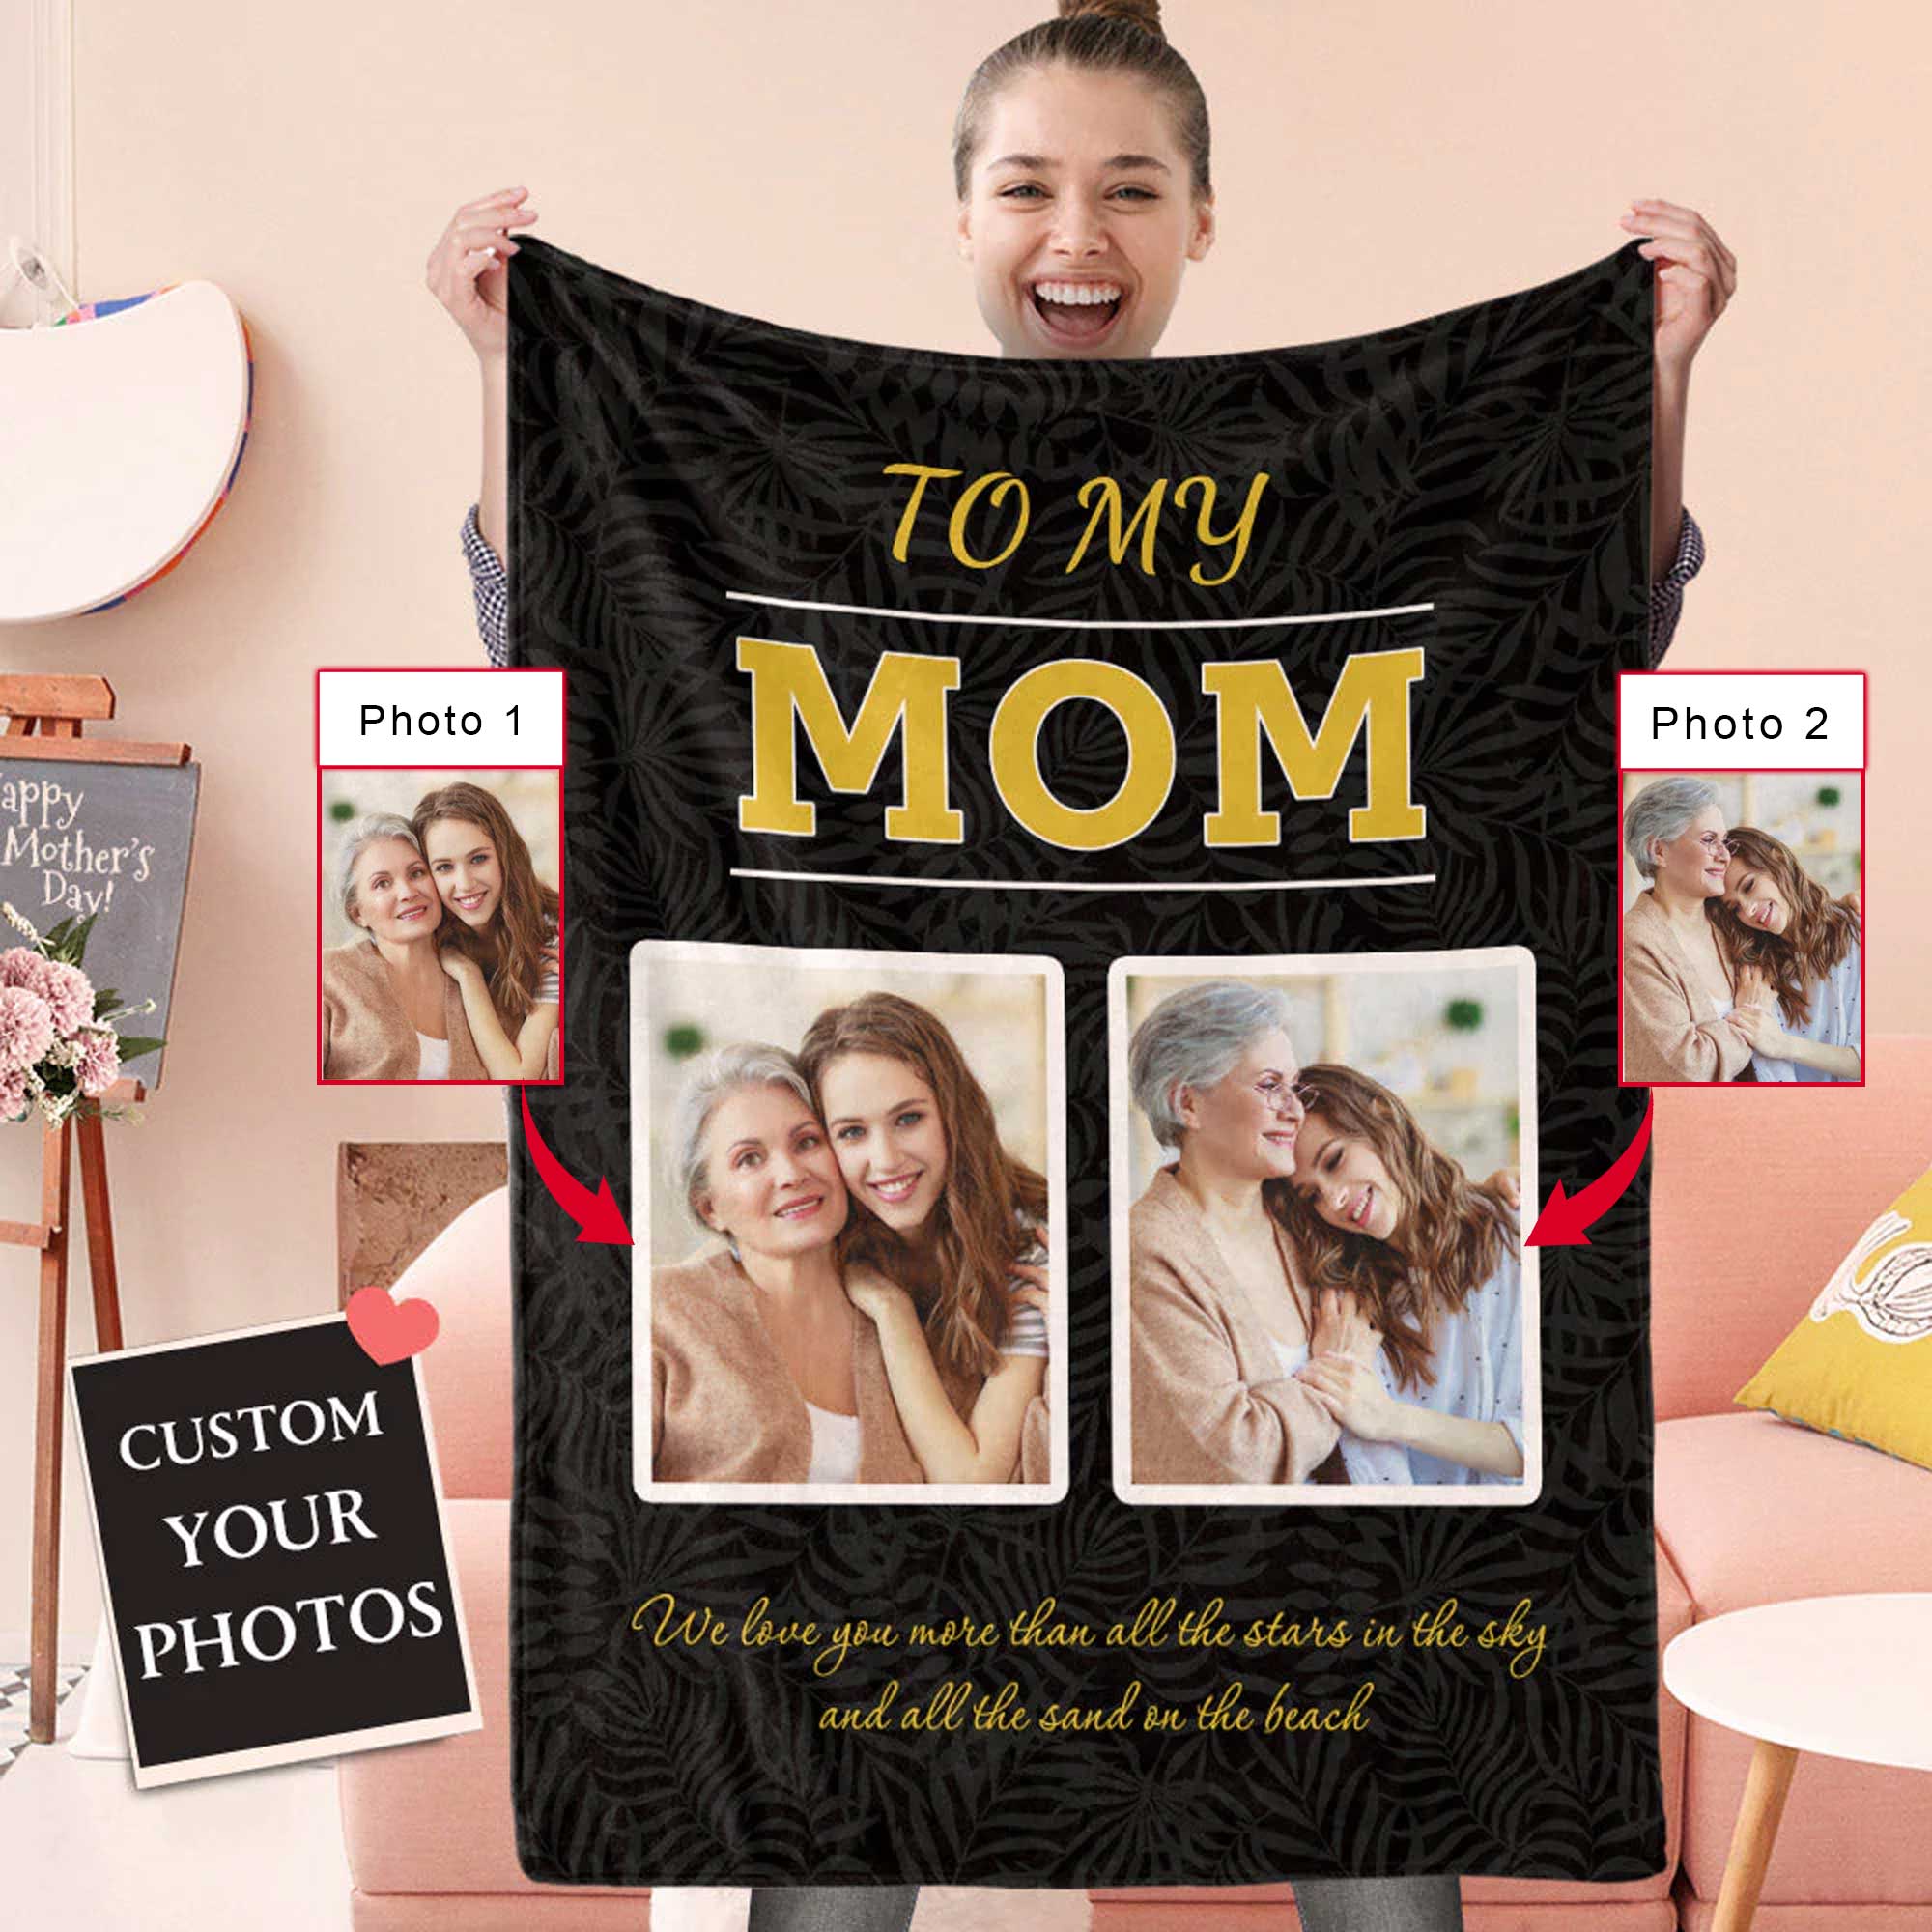 Custom Photo Blanket - Gift For Mom Personalized Blanket - Best Gift For Mother's Day Blanket, Presents For Mom - To My Mom, We love You Blanket